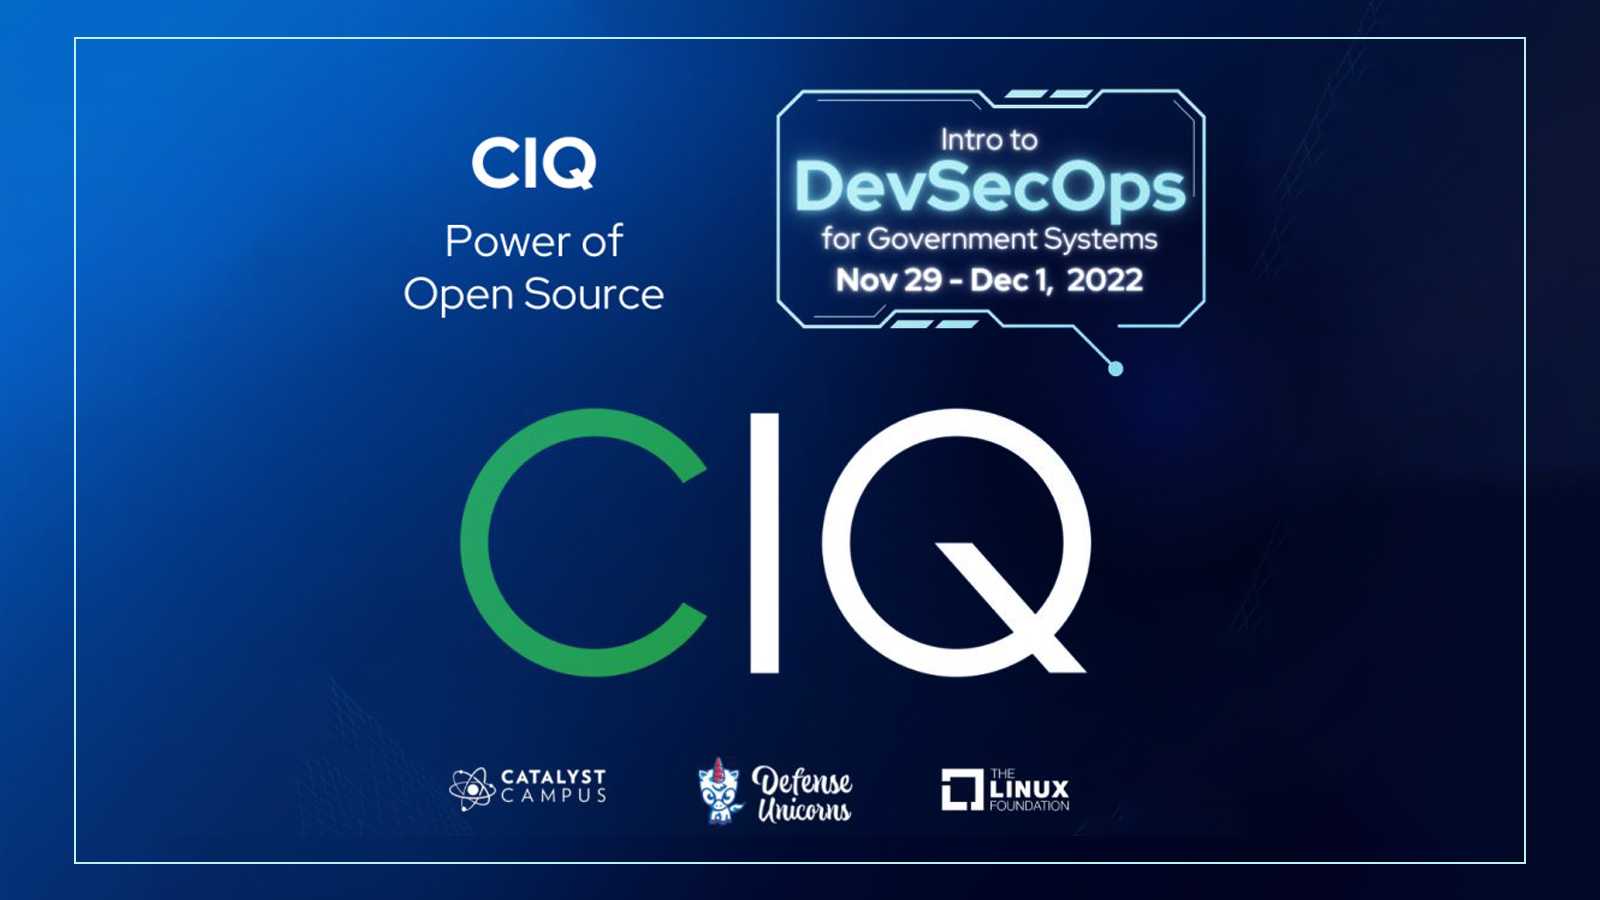 The Power of Open Source: Intro to DevSecOps for Government Systems